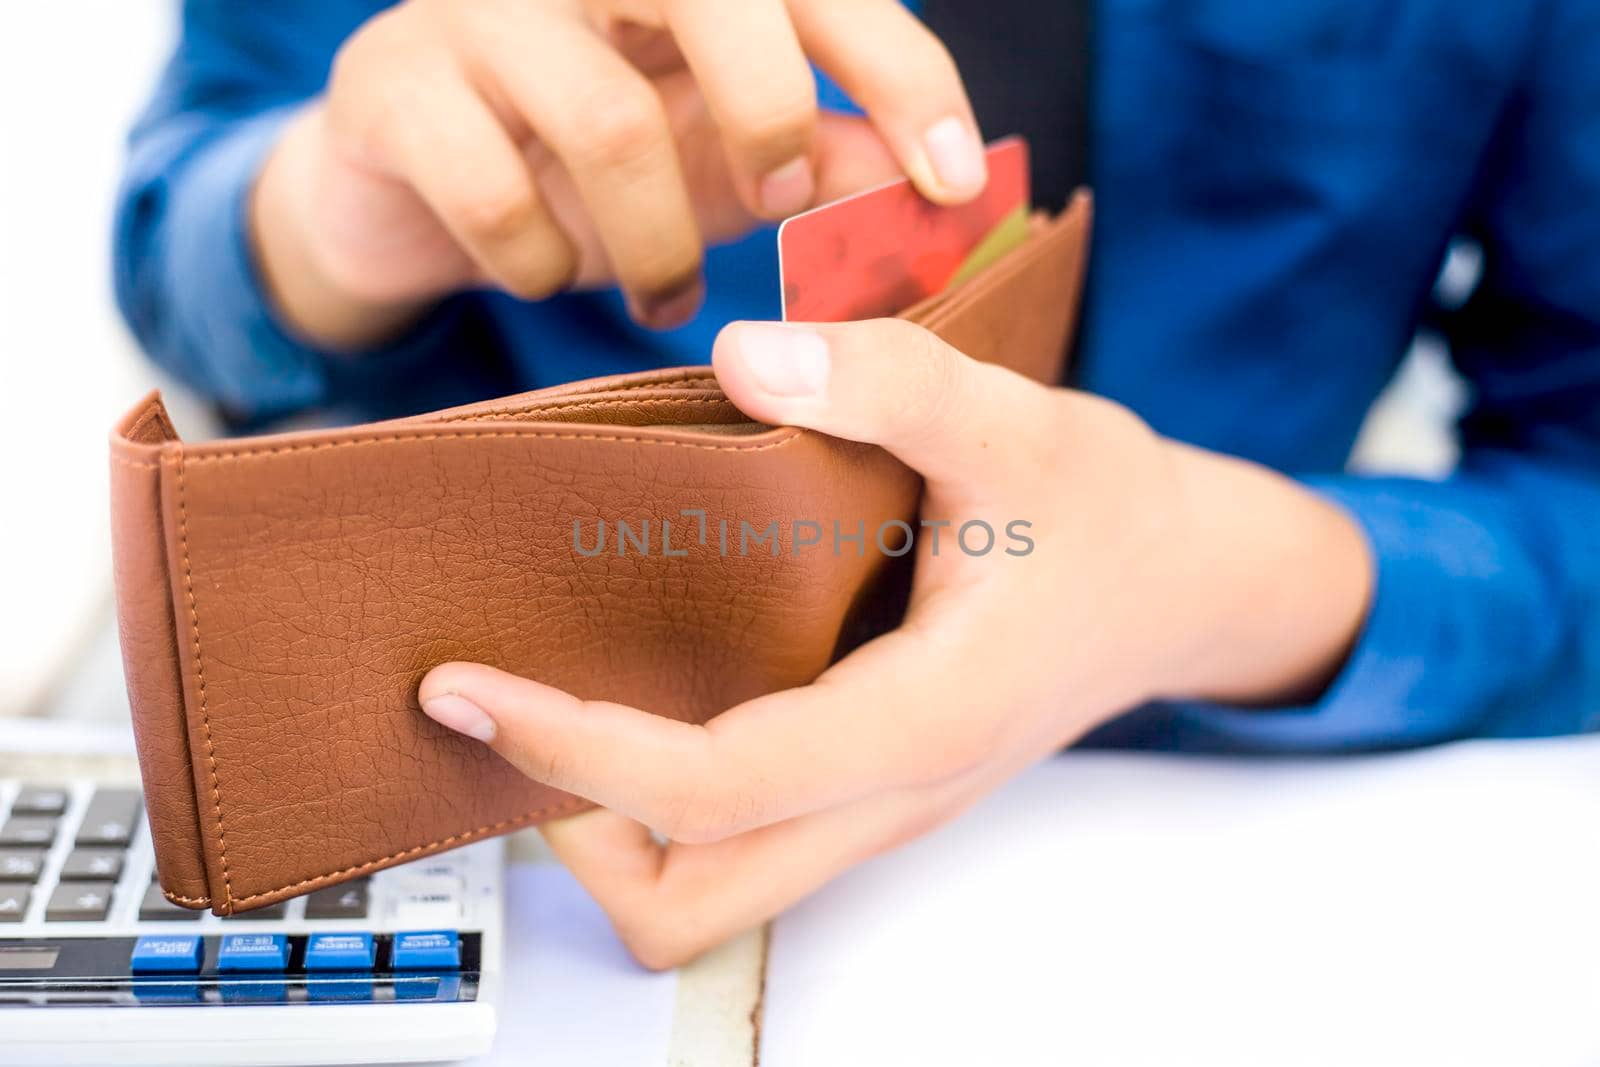 Businessman wearing a dark blue colored shirt with black tie and taking out his credit card from his brown colored wallet isolated on white. by mirzamlk